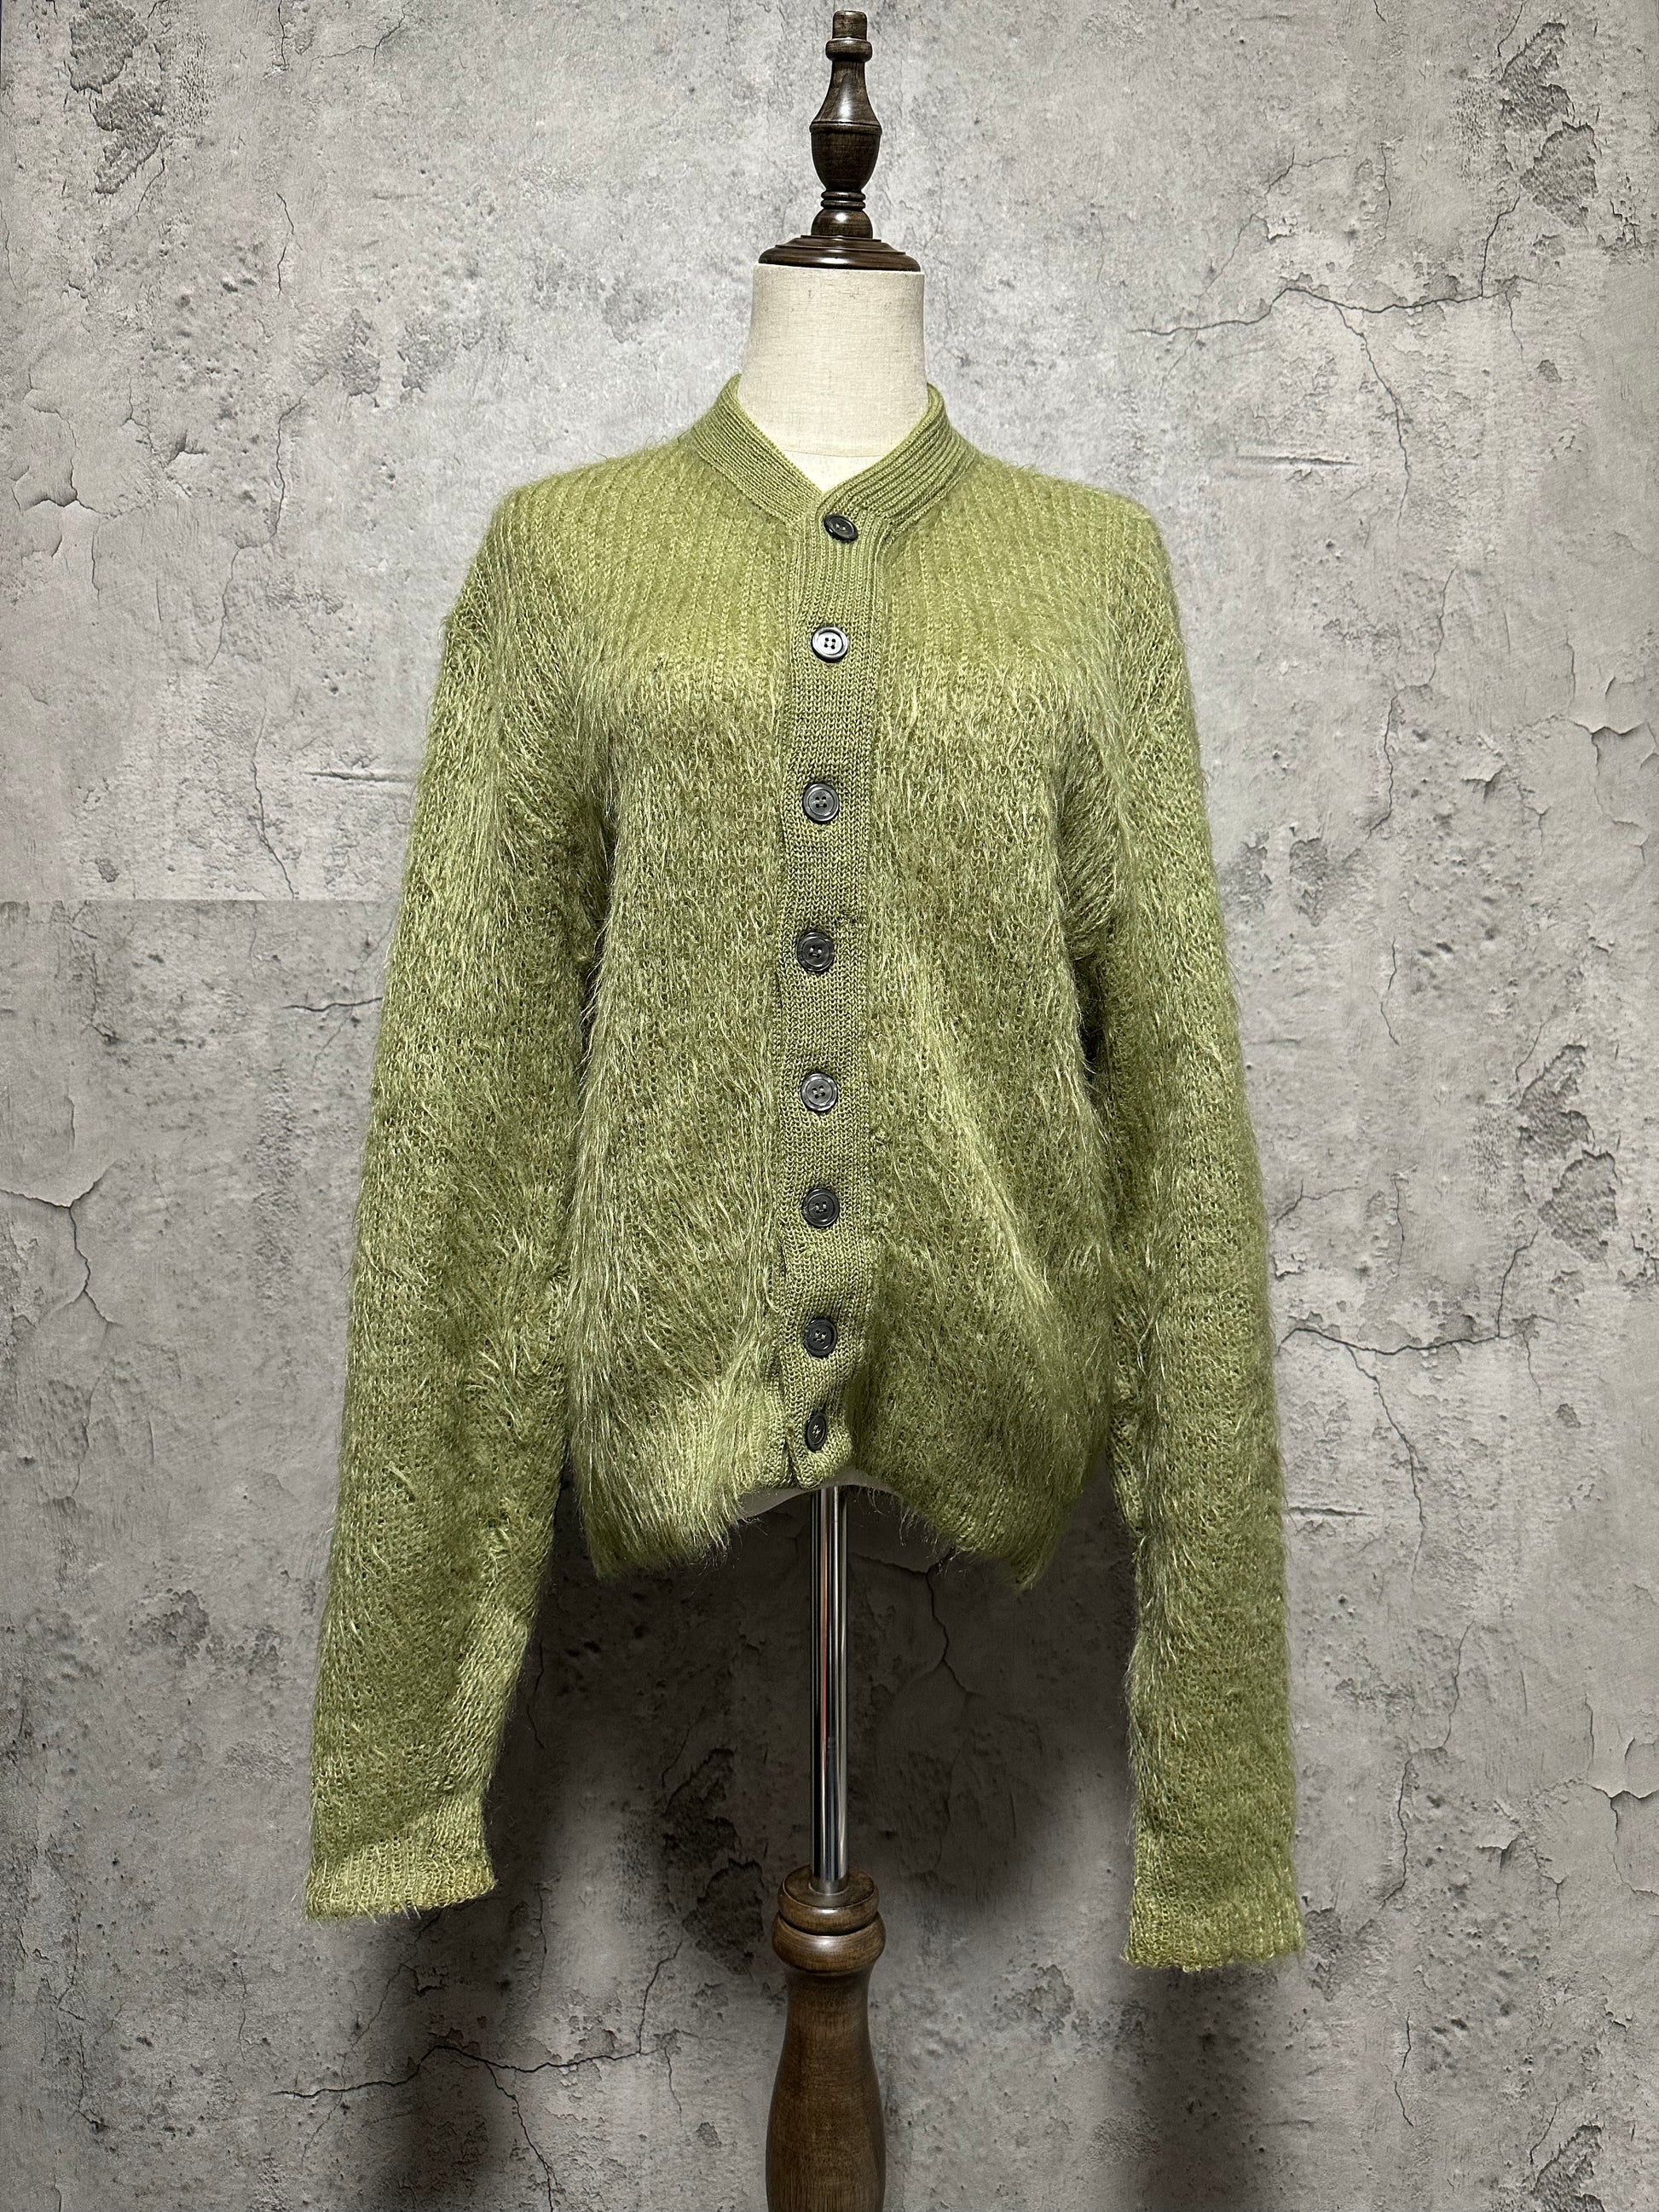 Sears Premiere COLLECTION mohair cardigan vintage 60s – itone